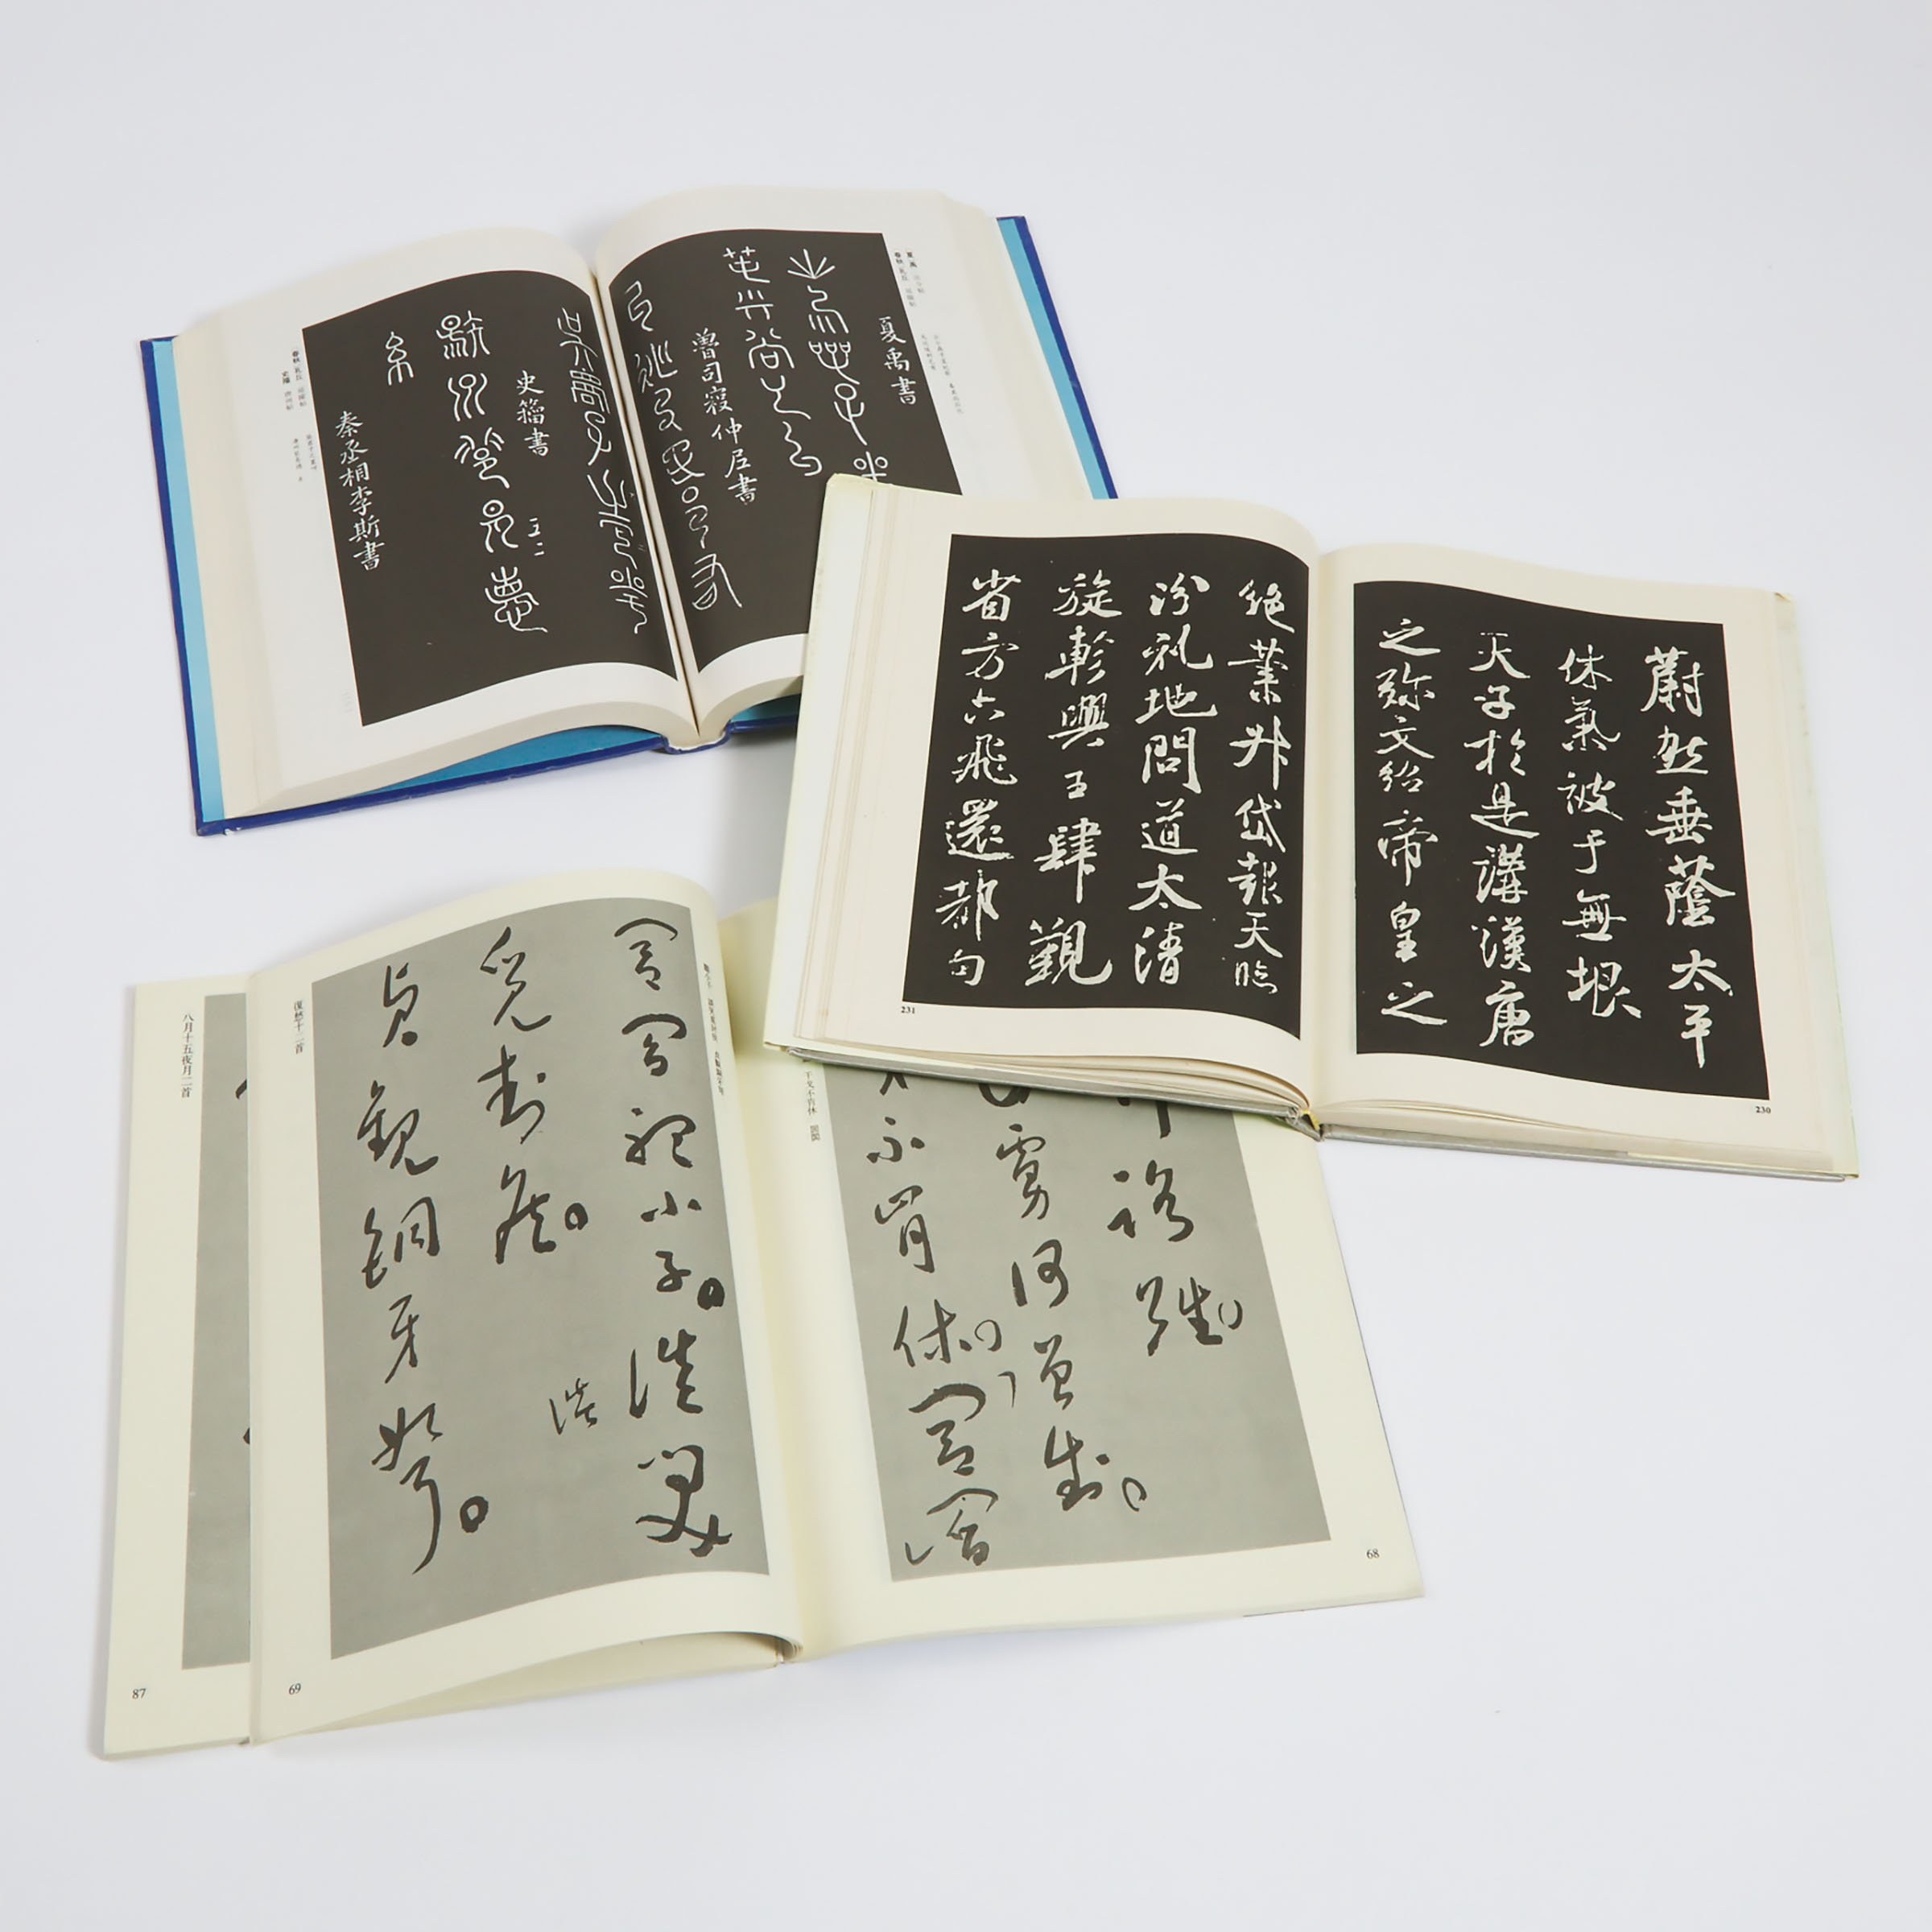 A Group of Chinese Books on Calligraphy, Rubbings, and Copies of Famous Calligraphers, Including Mi Fu, Yu Youren, and Sanxitang Fatie